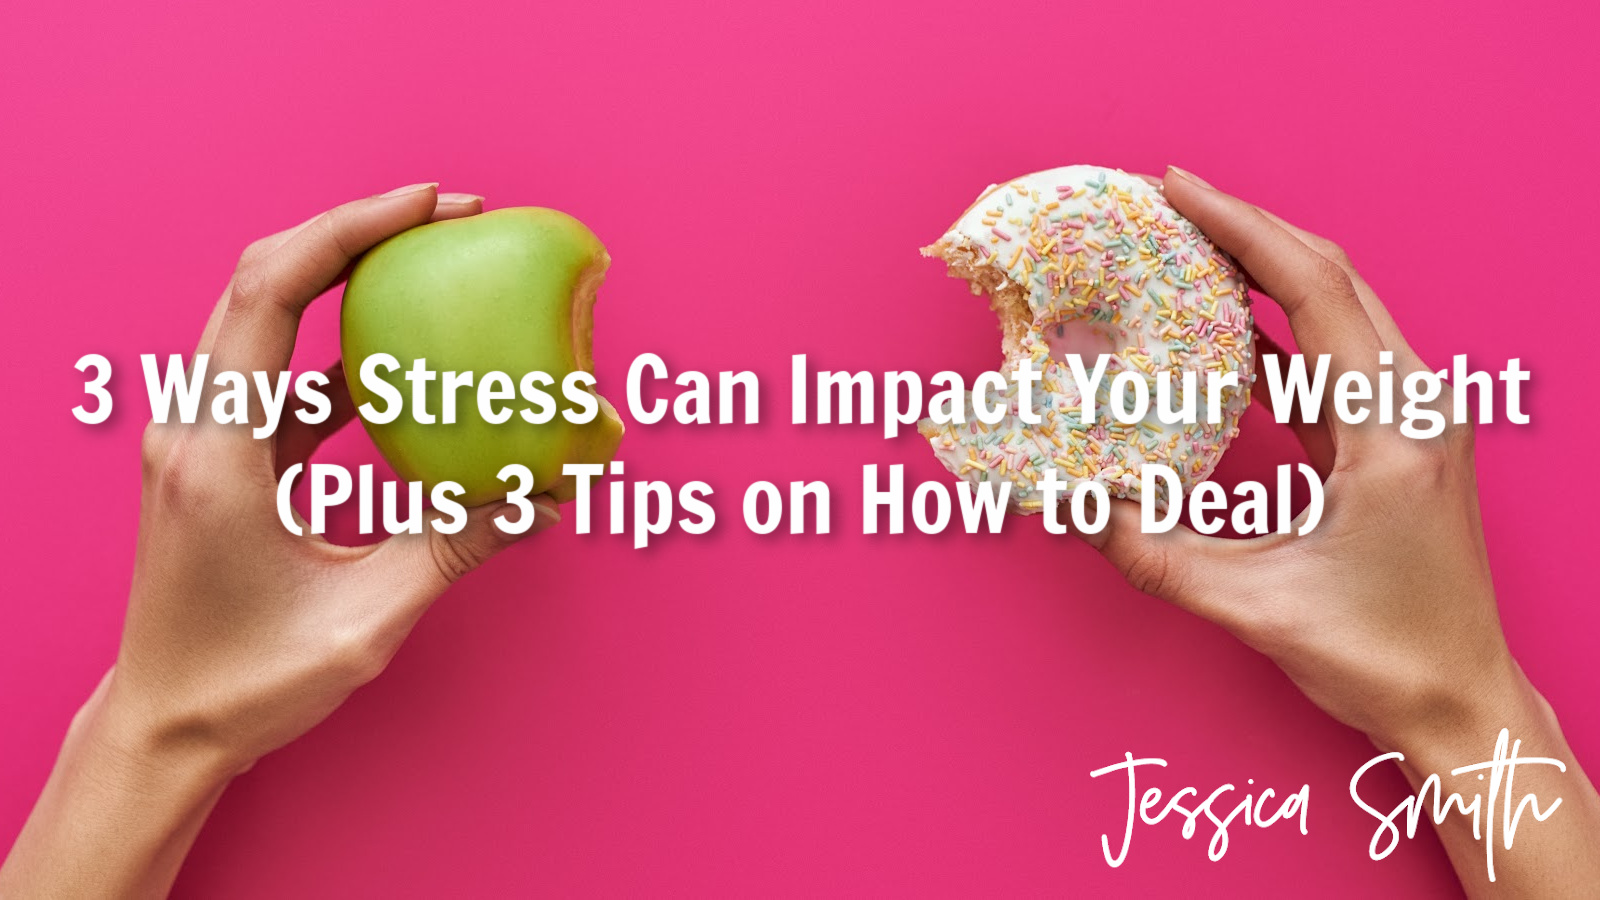 3 Ways Stress Can Impact Your Weight (Plus 3 Tips on How to Deal)